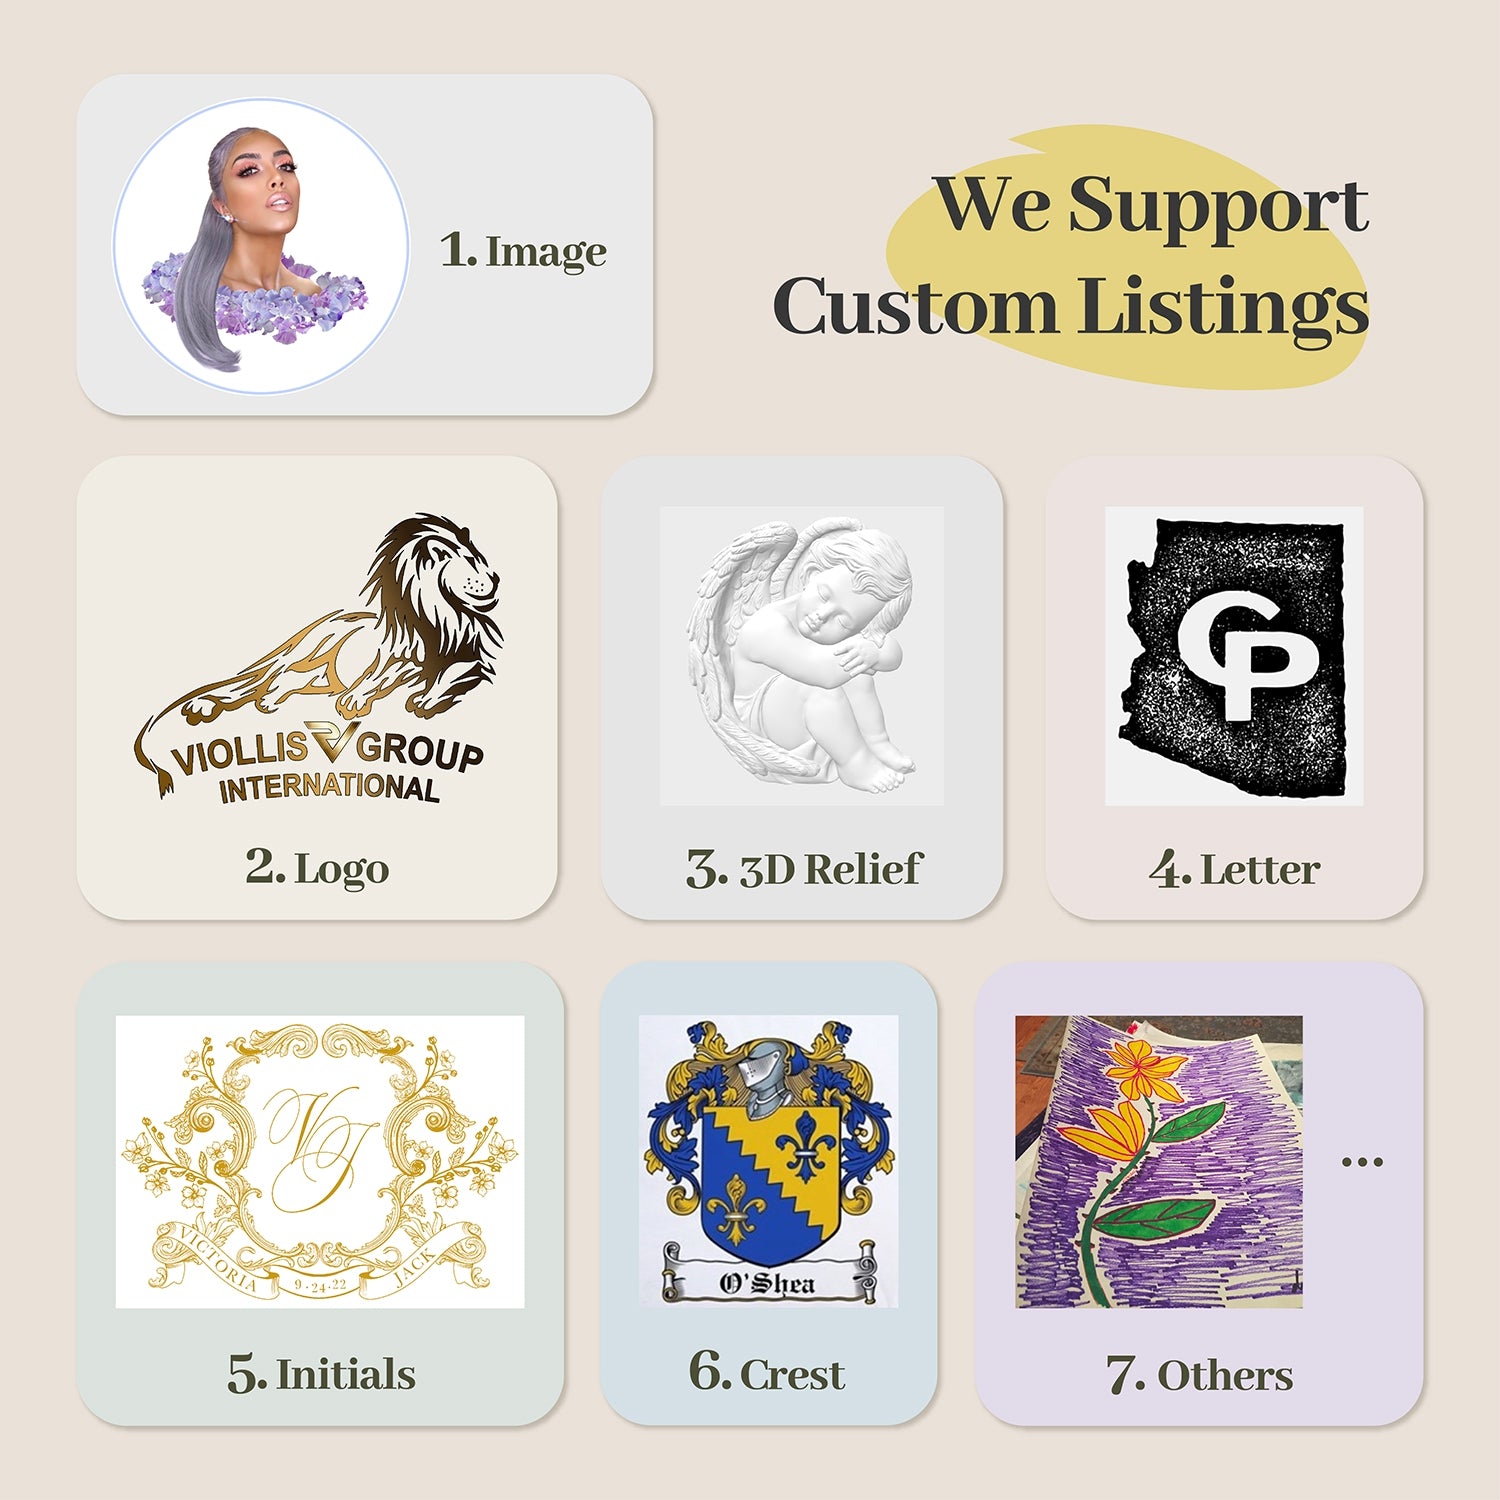 Your customized personal 3D wax seal // Special shape 3D seal